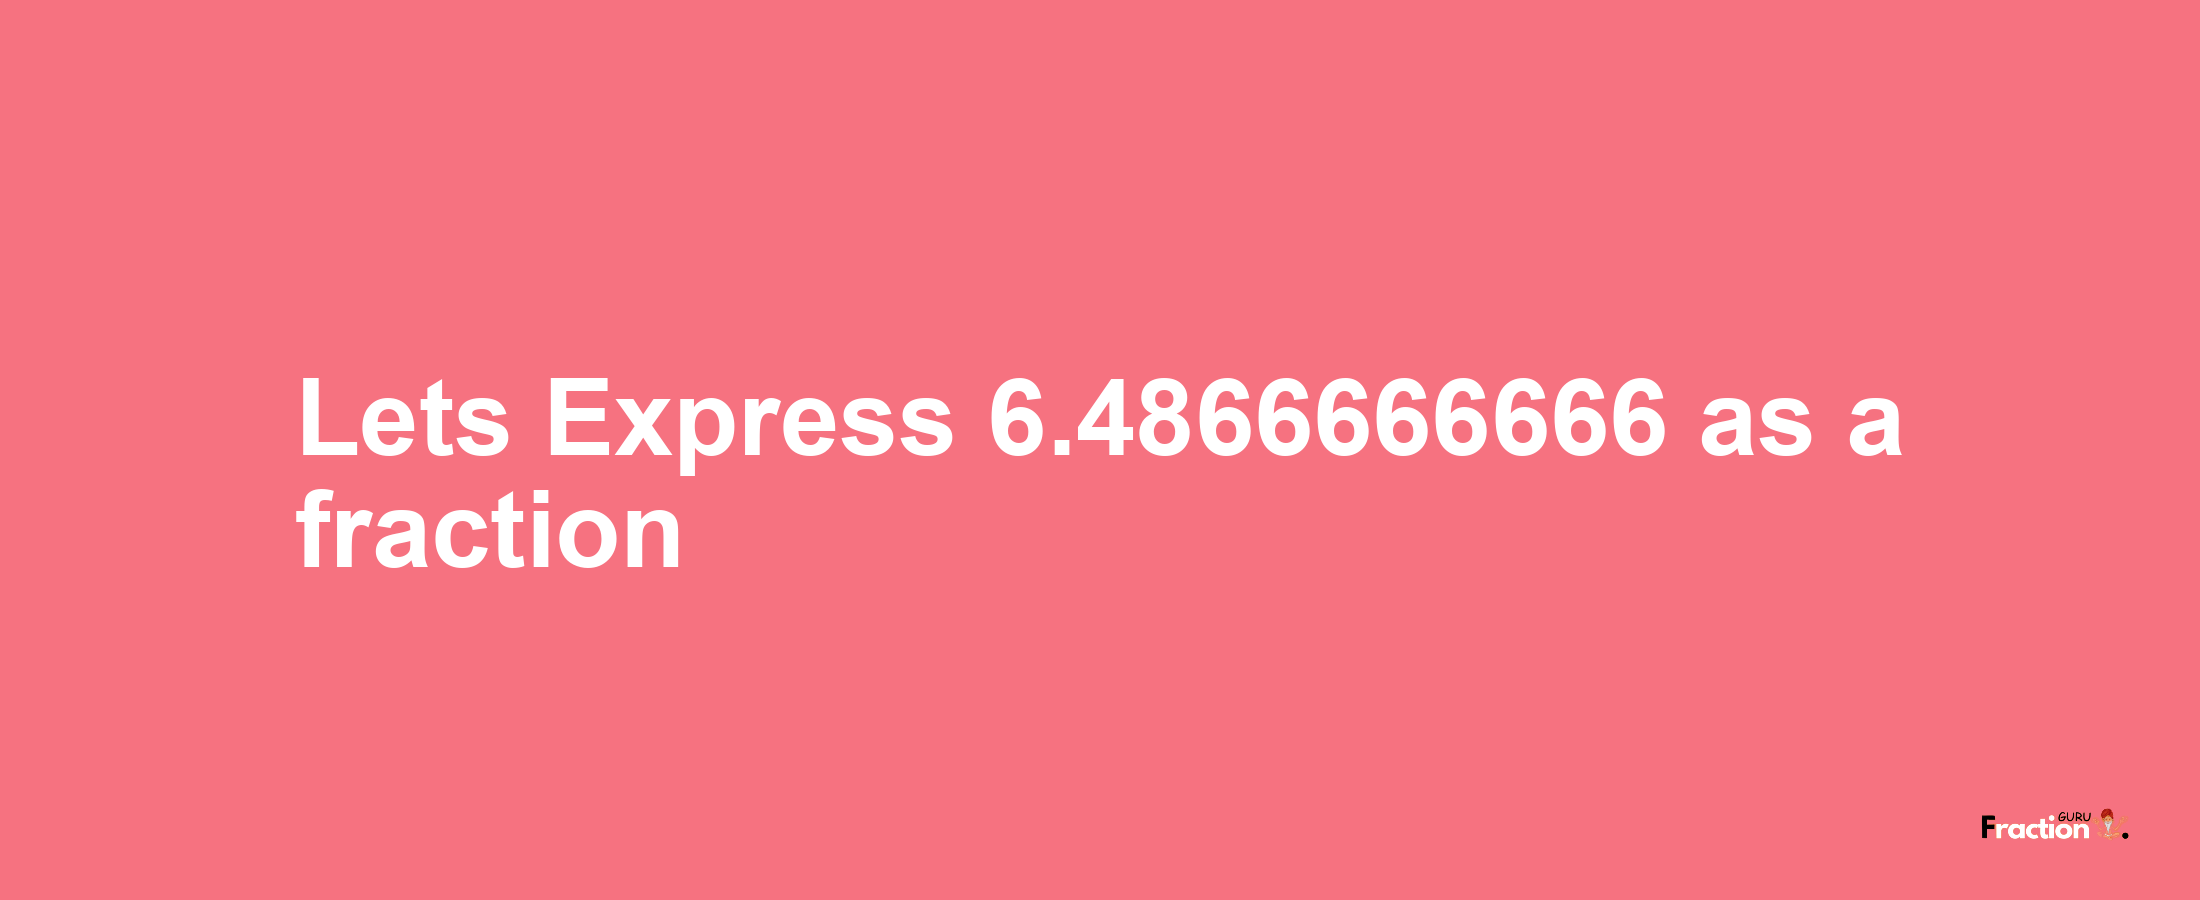 Lets Express 6.4866666666 as afraction